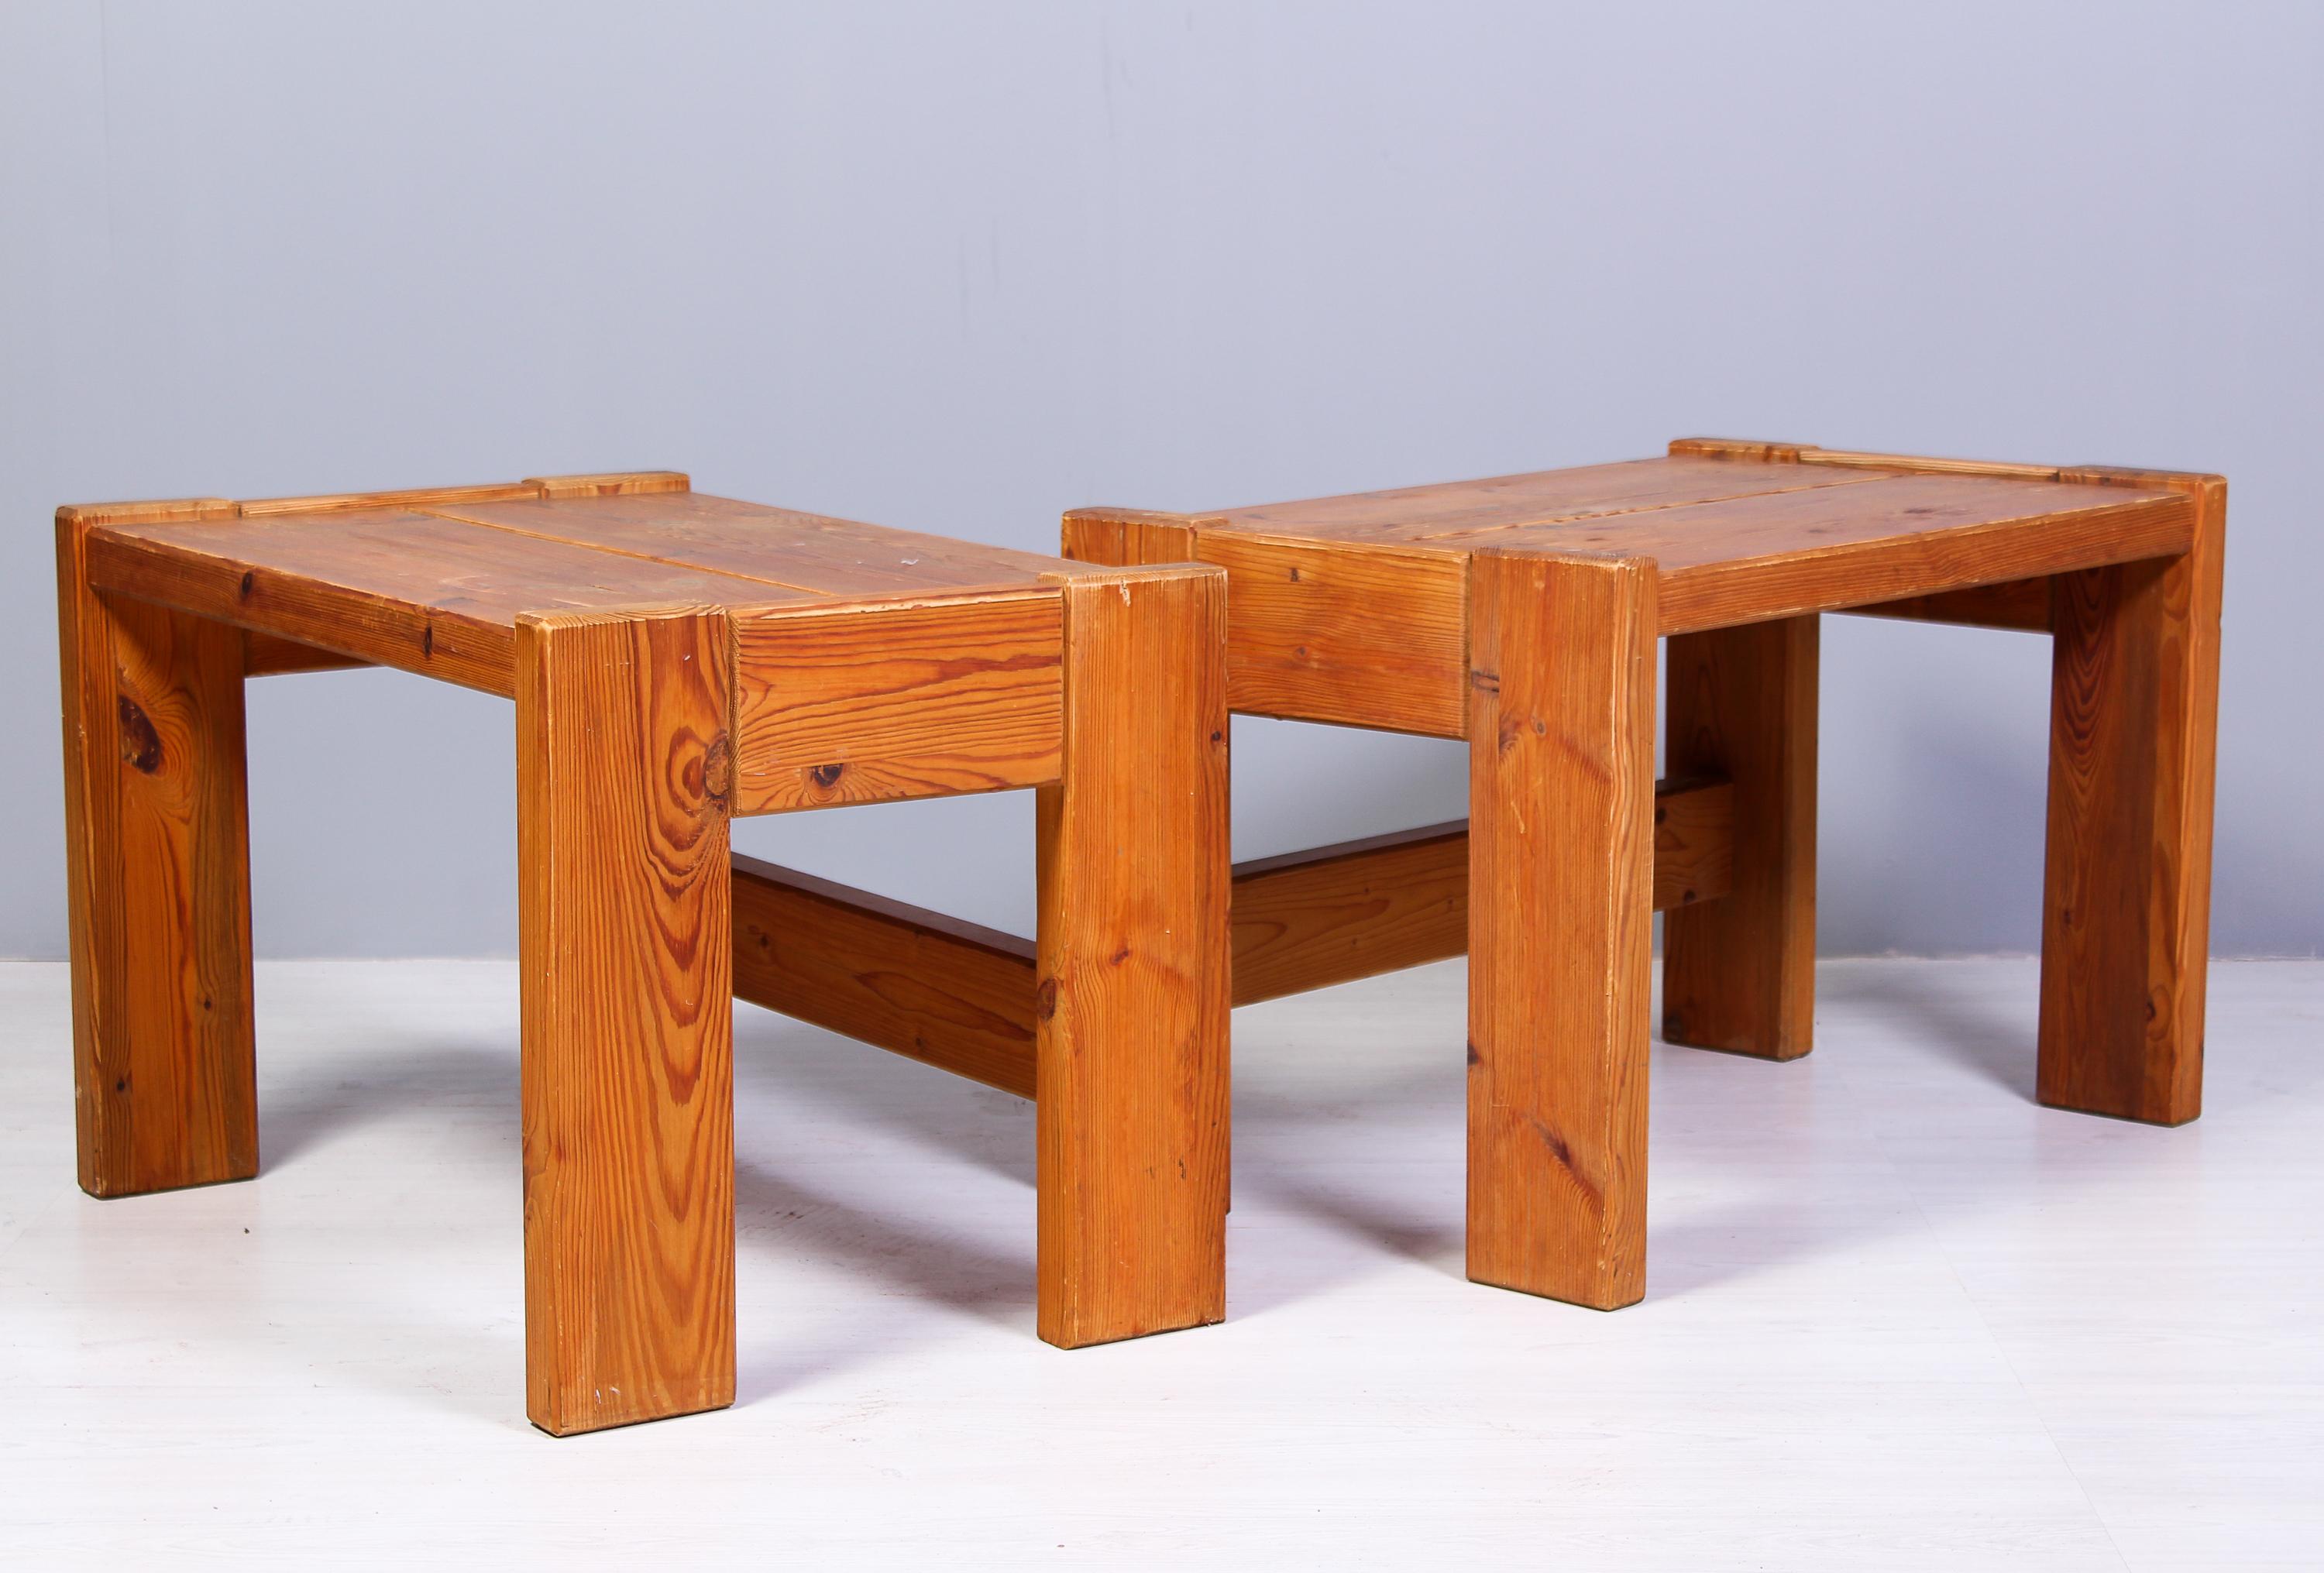 A pair of solid pine side tables that can be used as tables, nightstands or benches. The size gives the pieces a functionality that can be used in many places. The condition is good with signs of usage and patina but no structural damages.